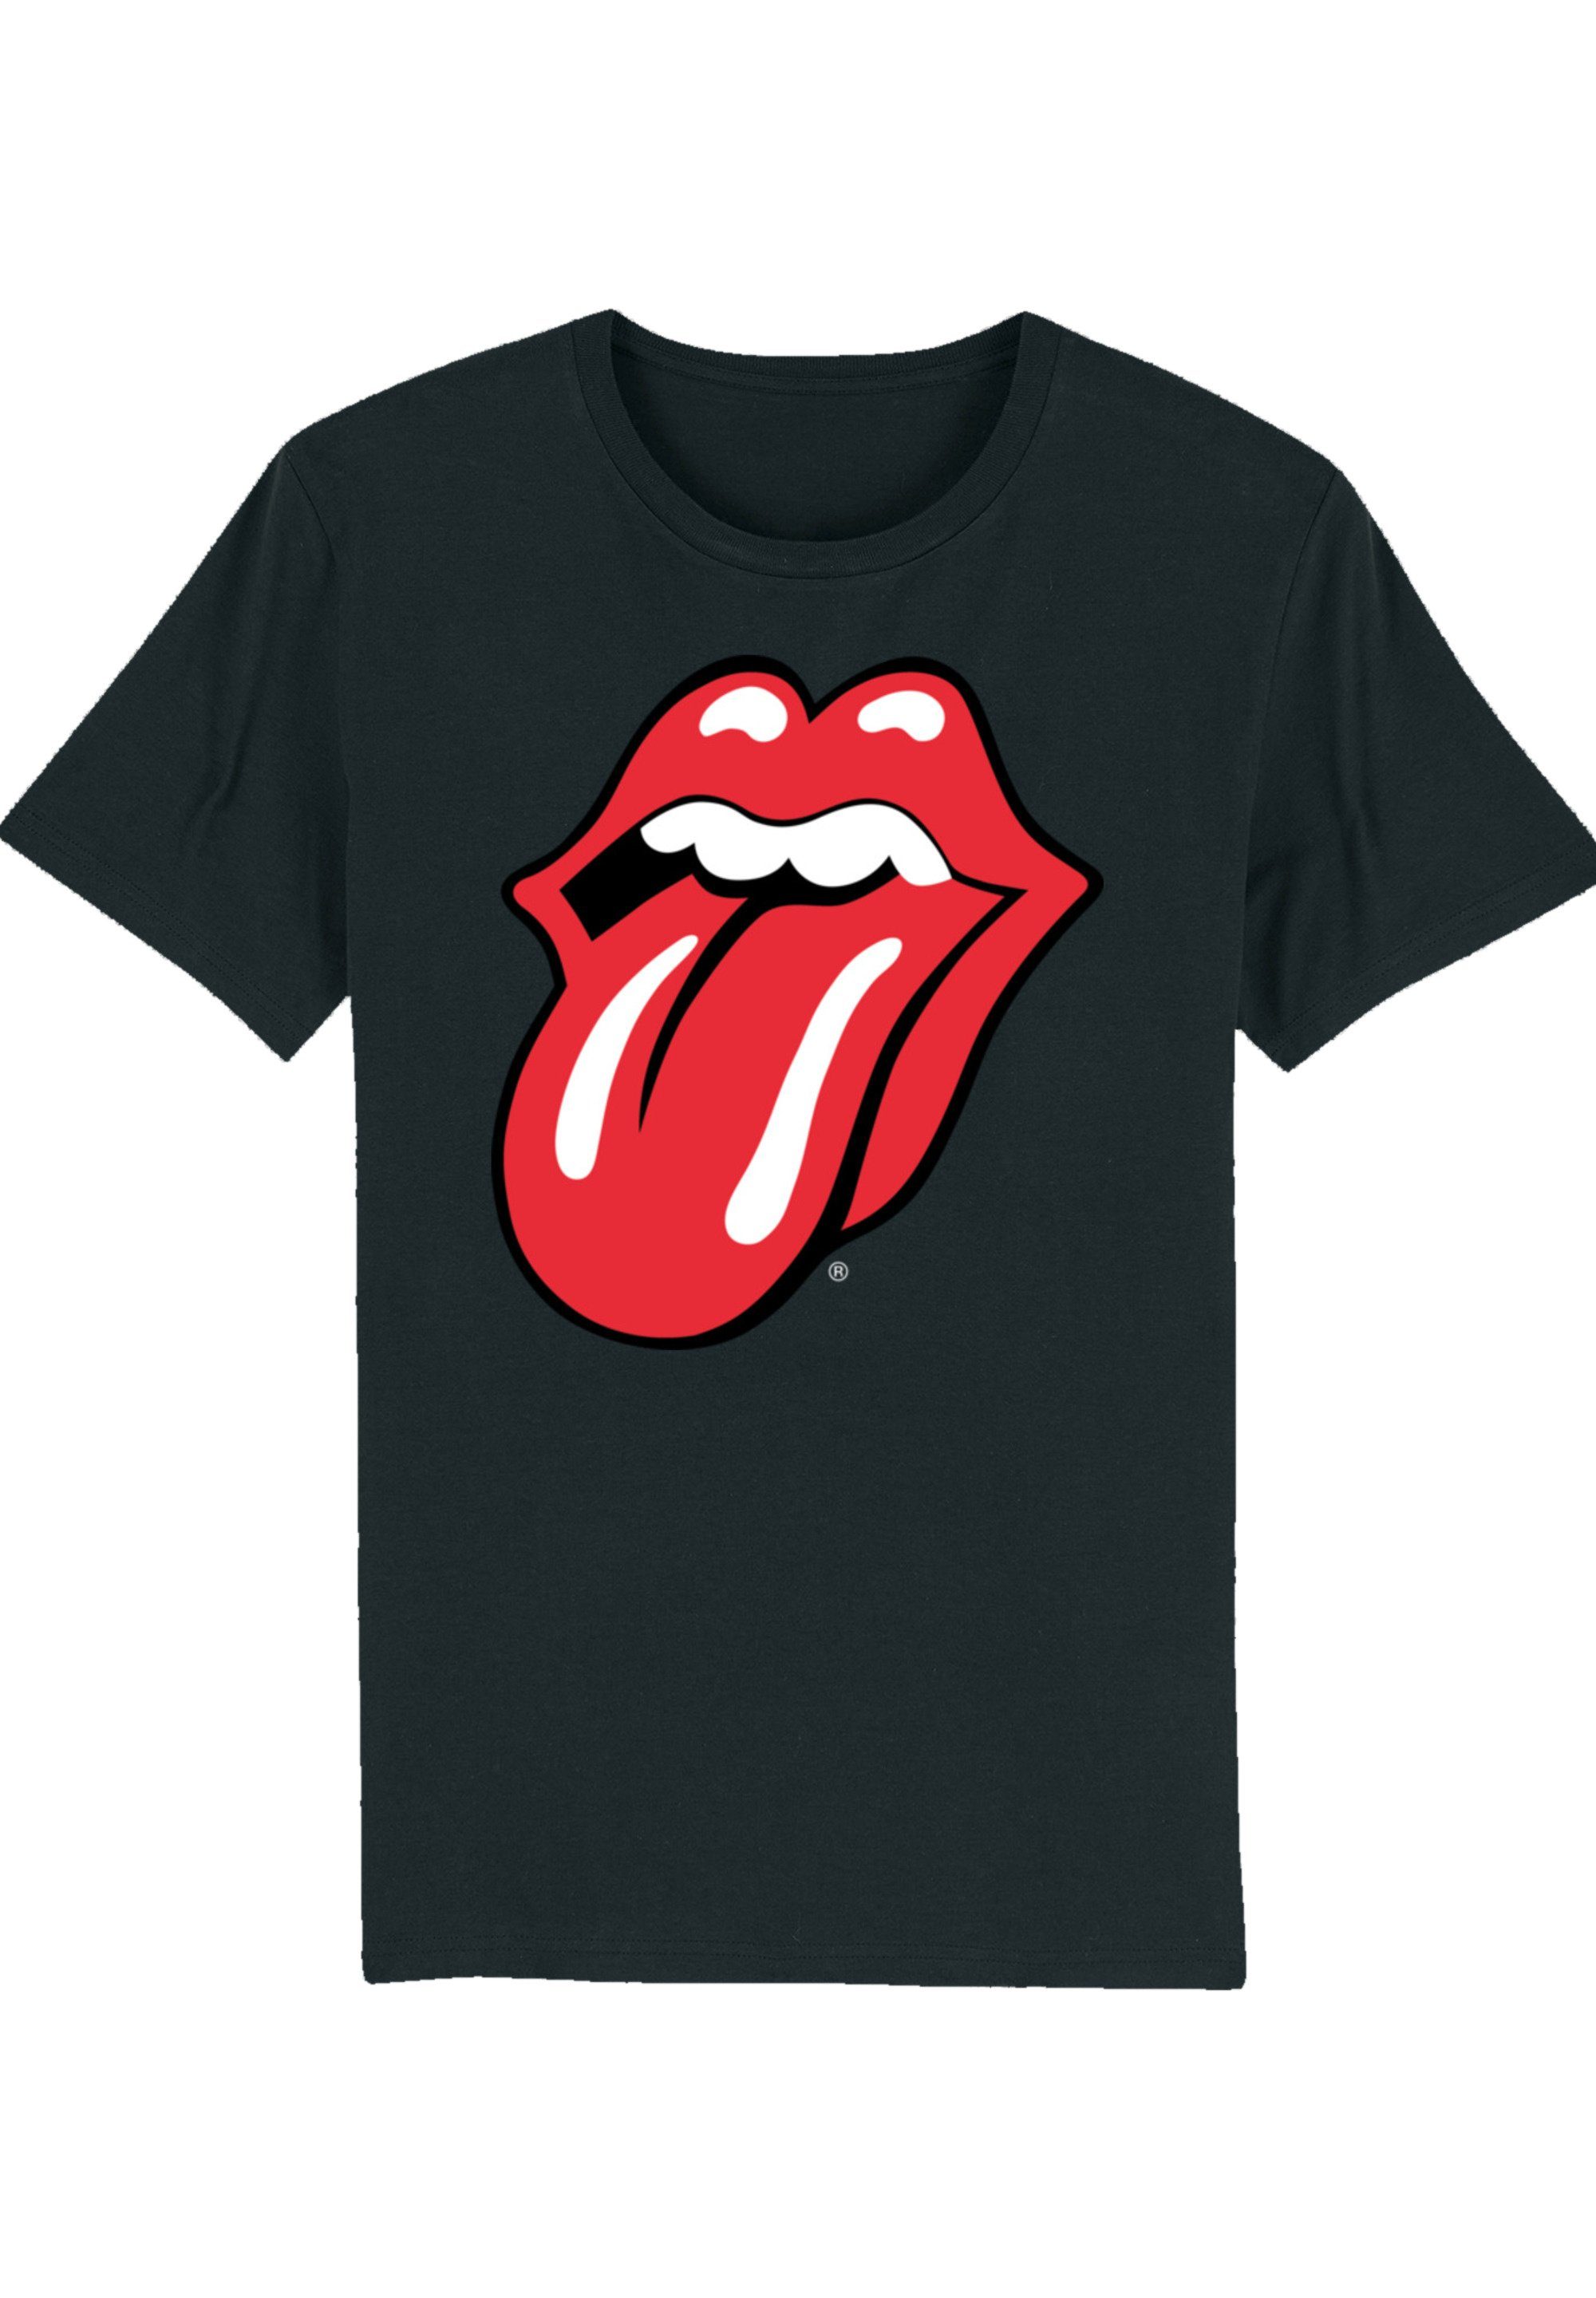 Stones Print Zunge The Rolling T-Shirt schwarz F4NT4STIC Rote